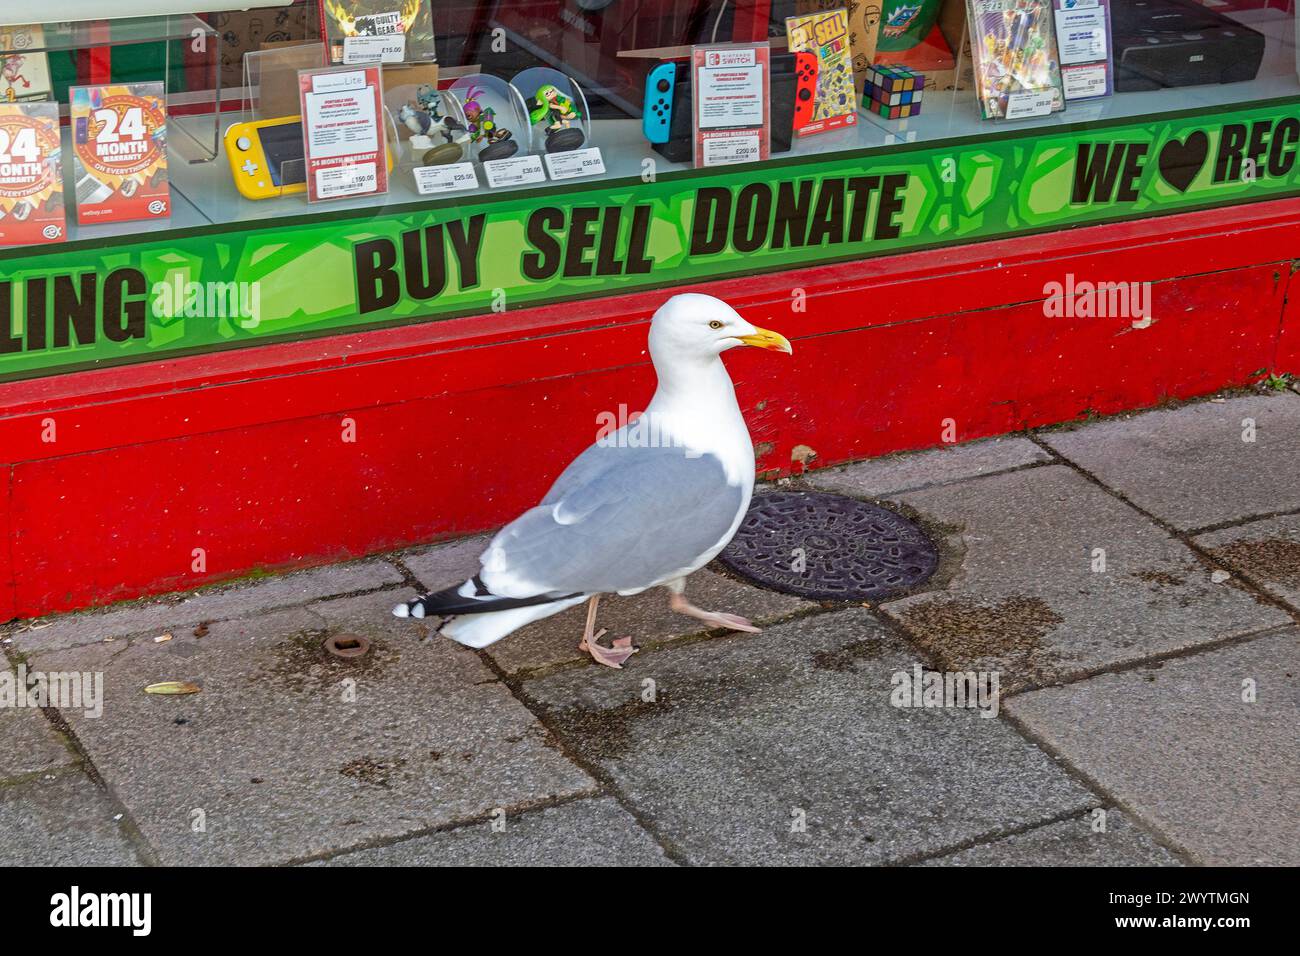 Seagull in front of shop window, Bangor, Wales, Great Britain Stock Photo